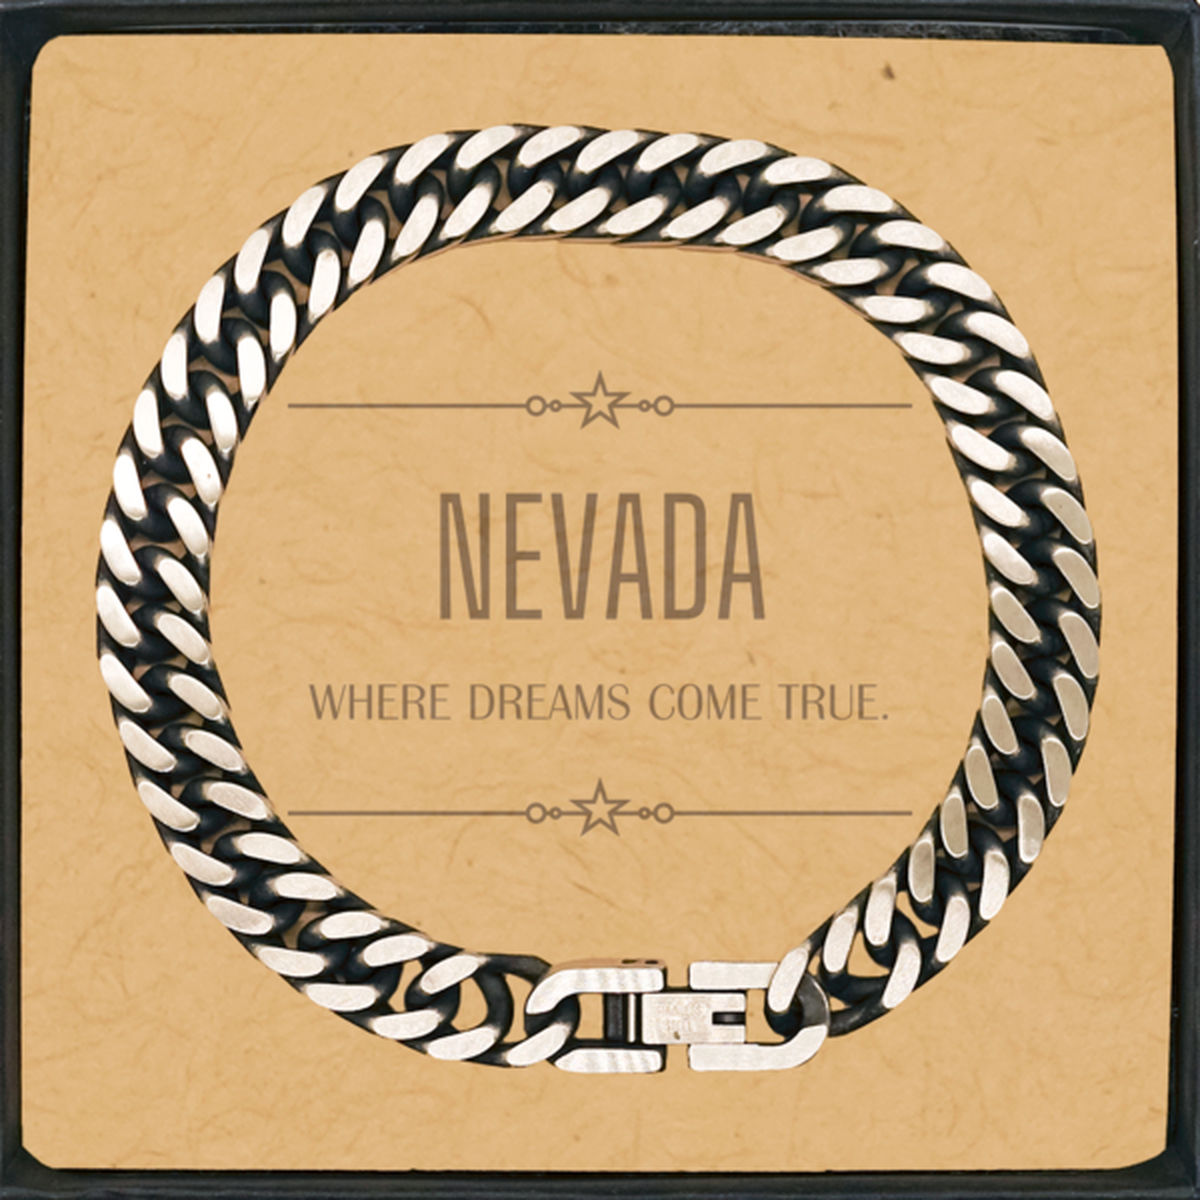 Love Nevada State Cuban Link Chain Bracelet, Nevada Where dreams come true, Birthday Inspirational Gifts For Nevada Men, Women, Friends